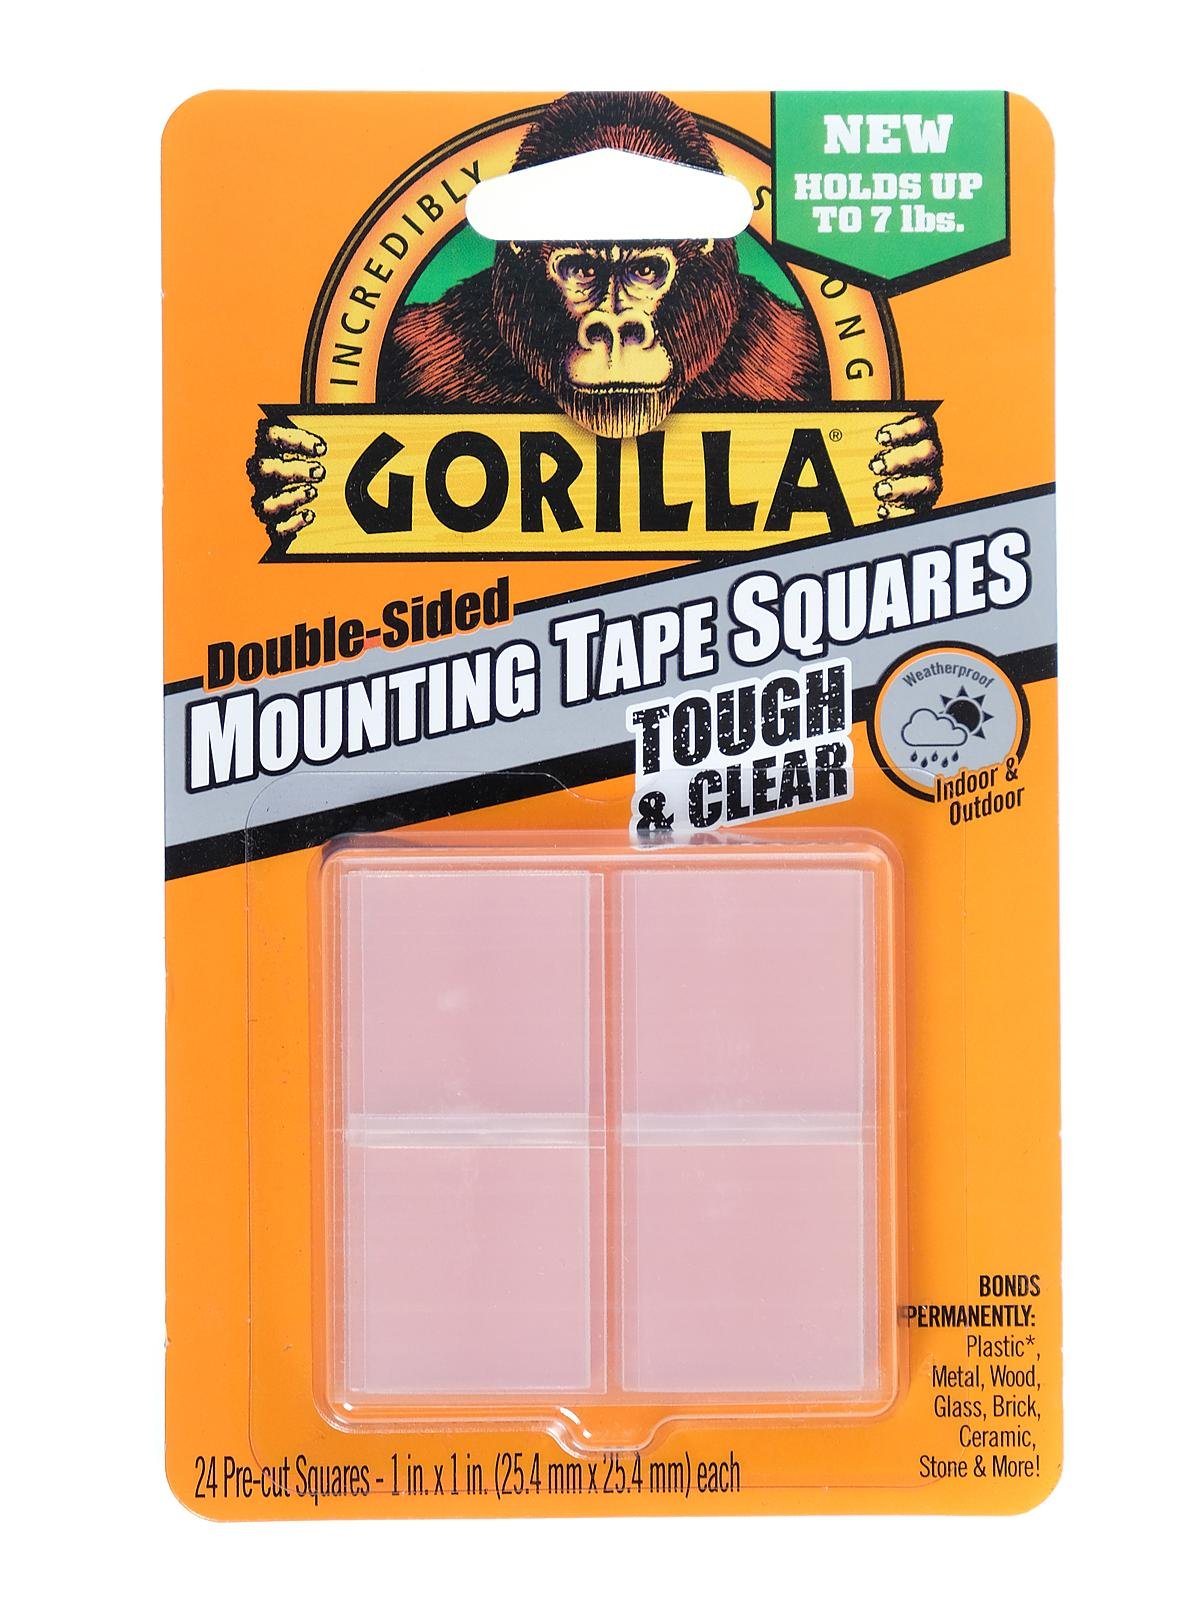 Gorilla Double Sided Tough & Clear Mounting Tape (Indoor & Outdoor